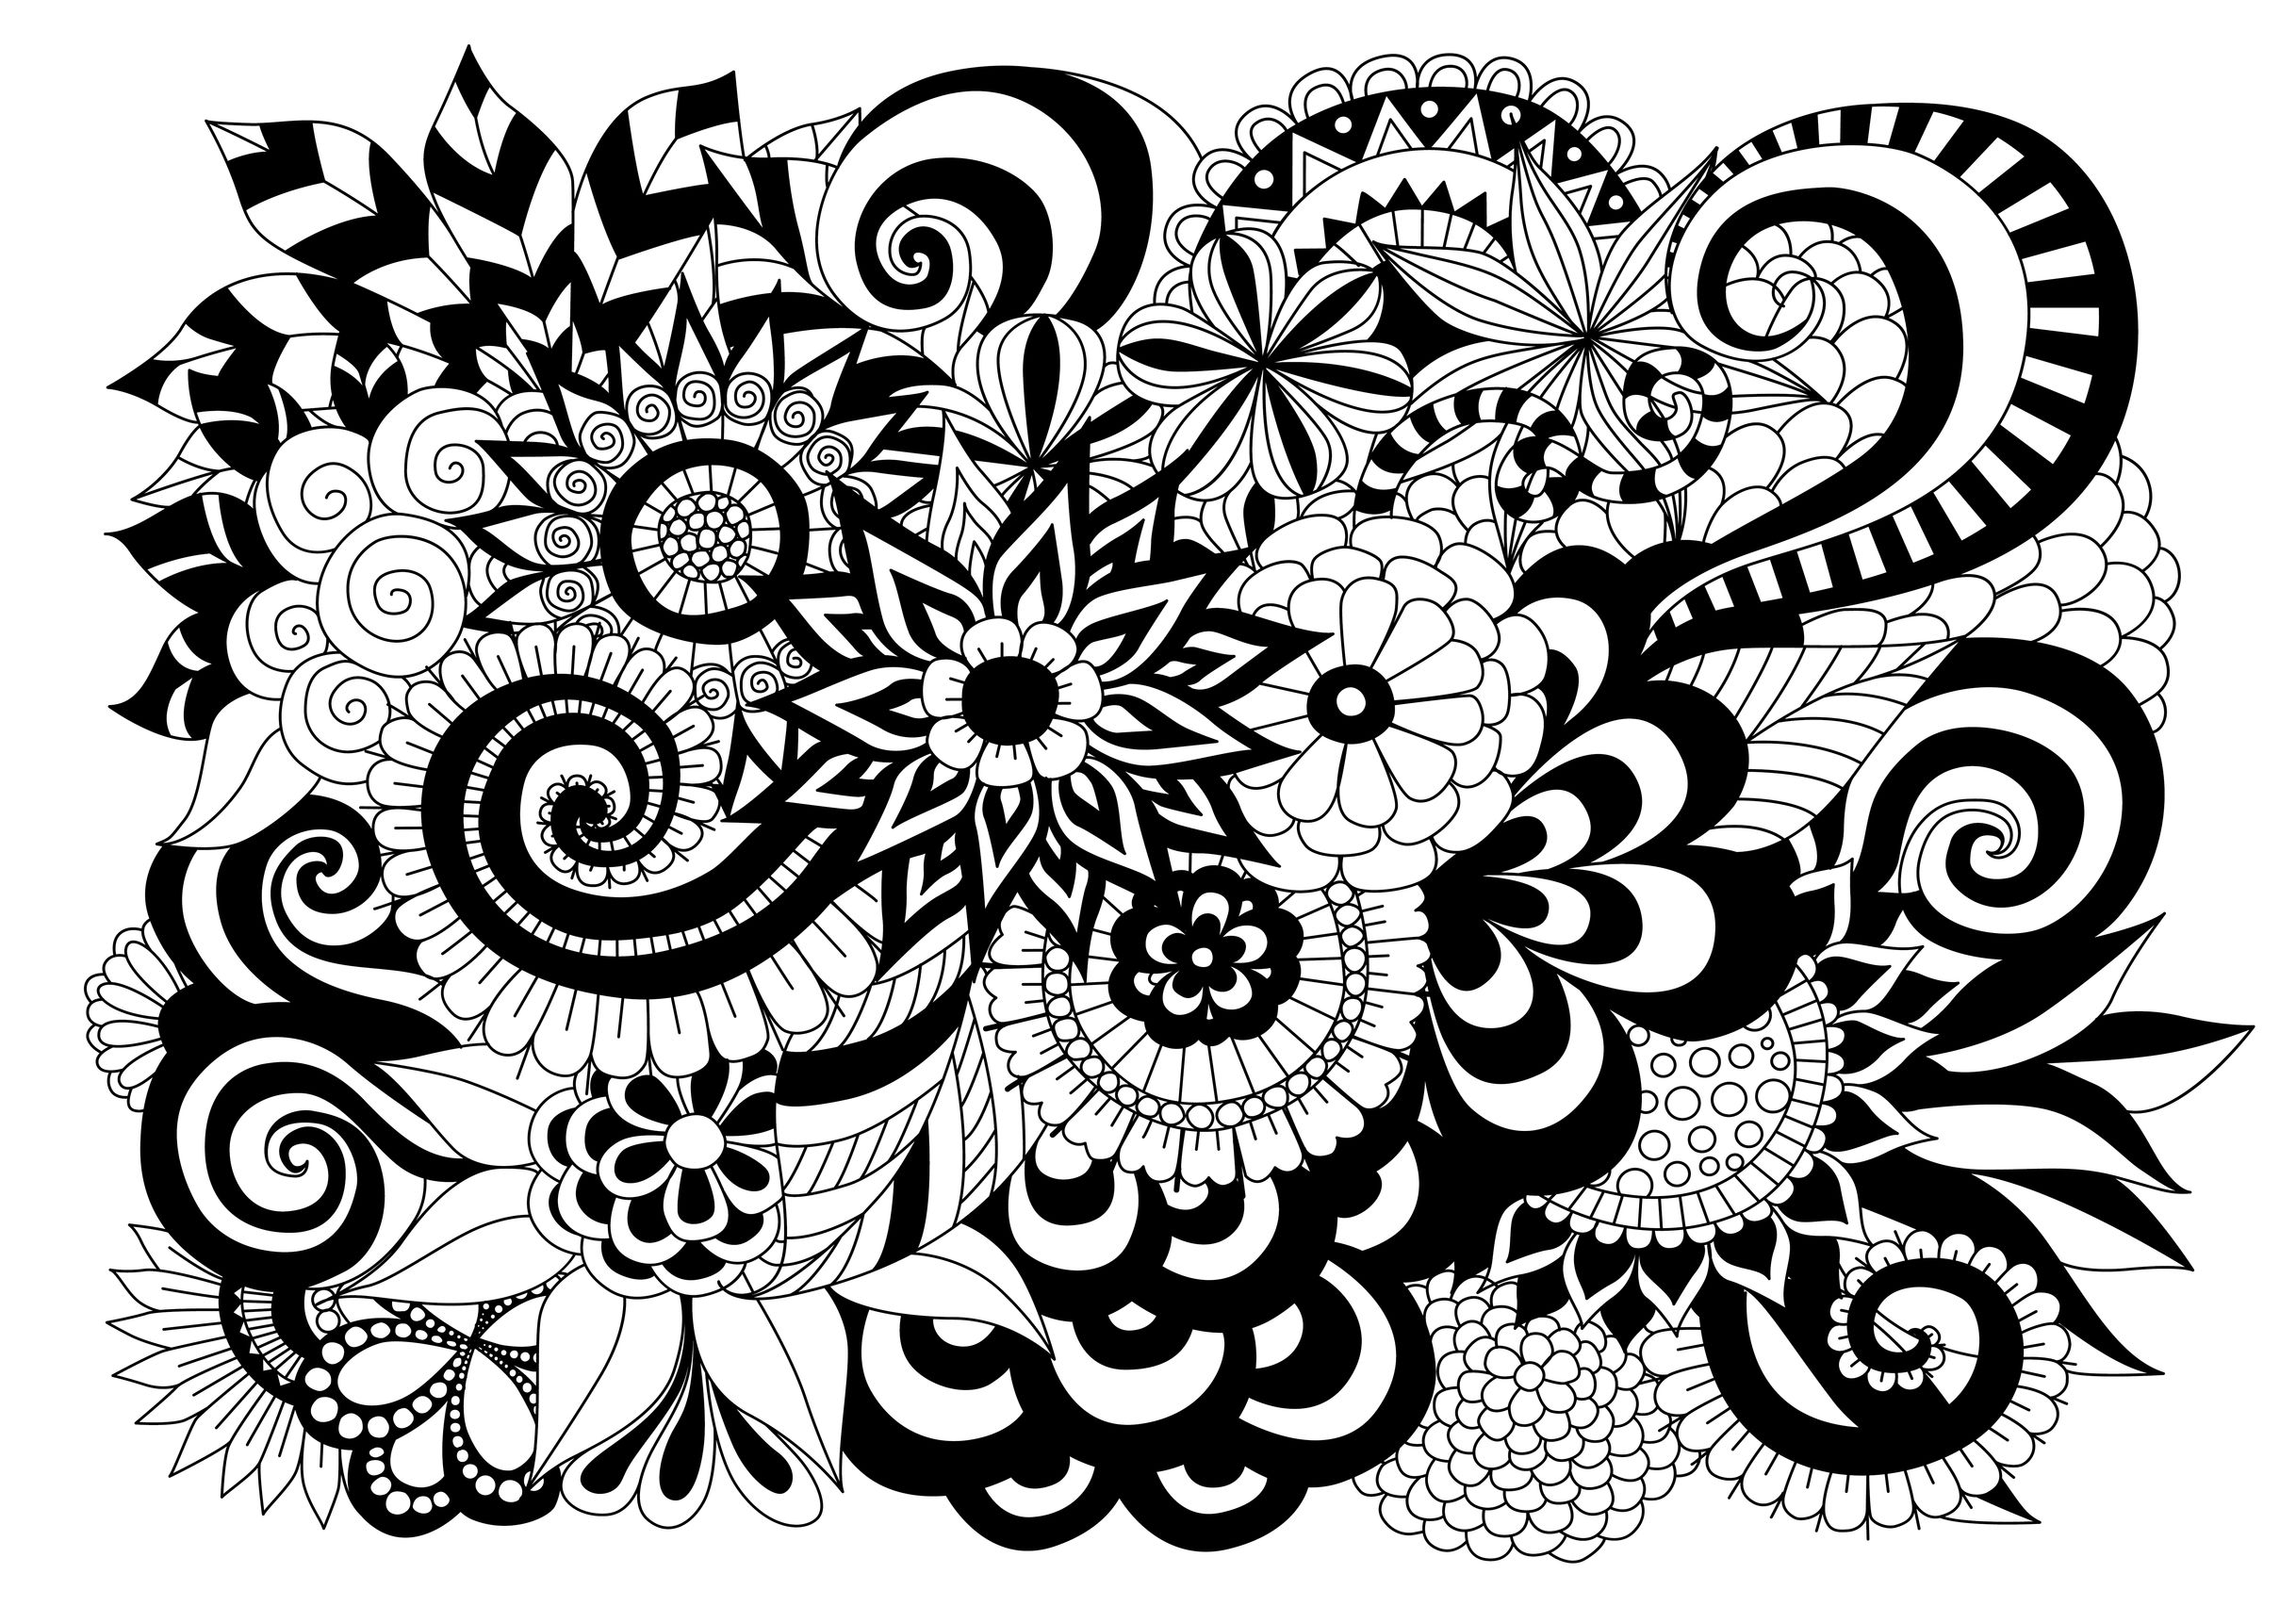 flower black and white coloring page